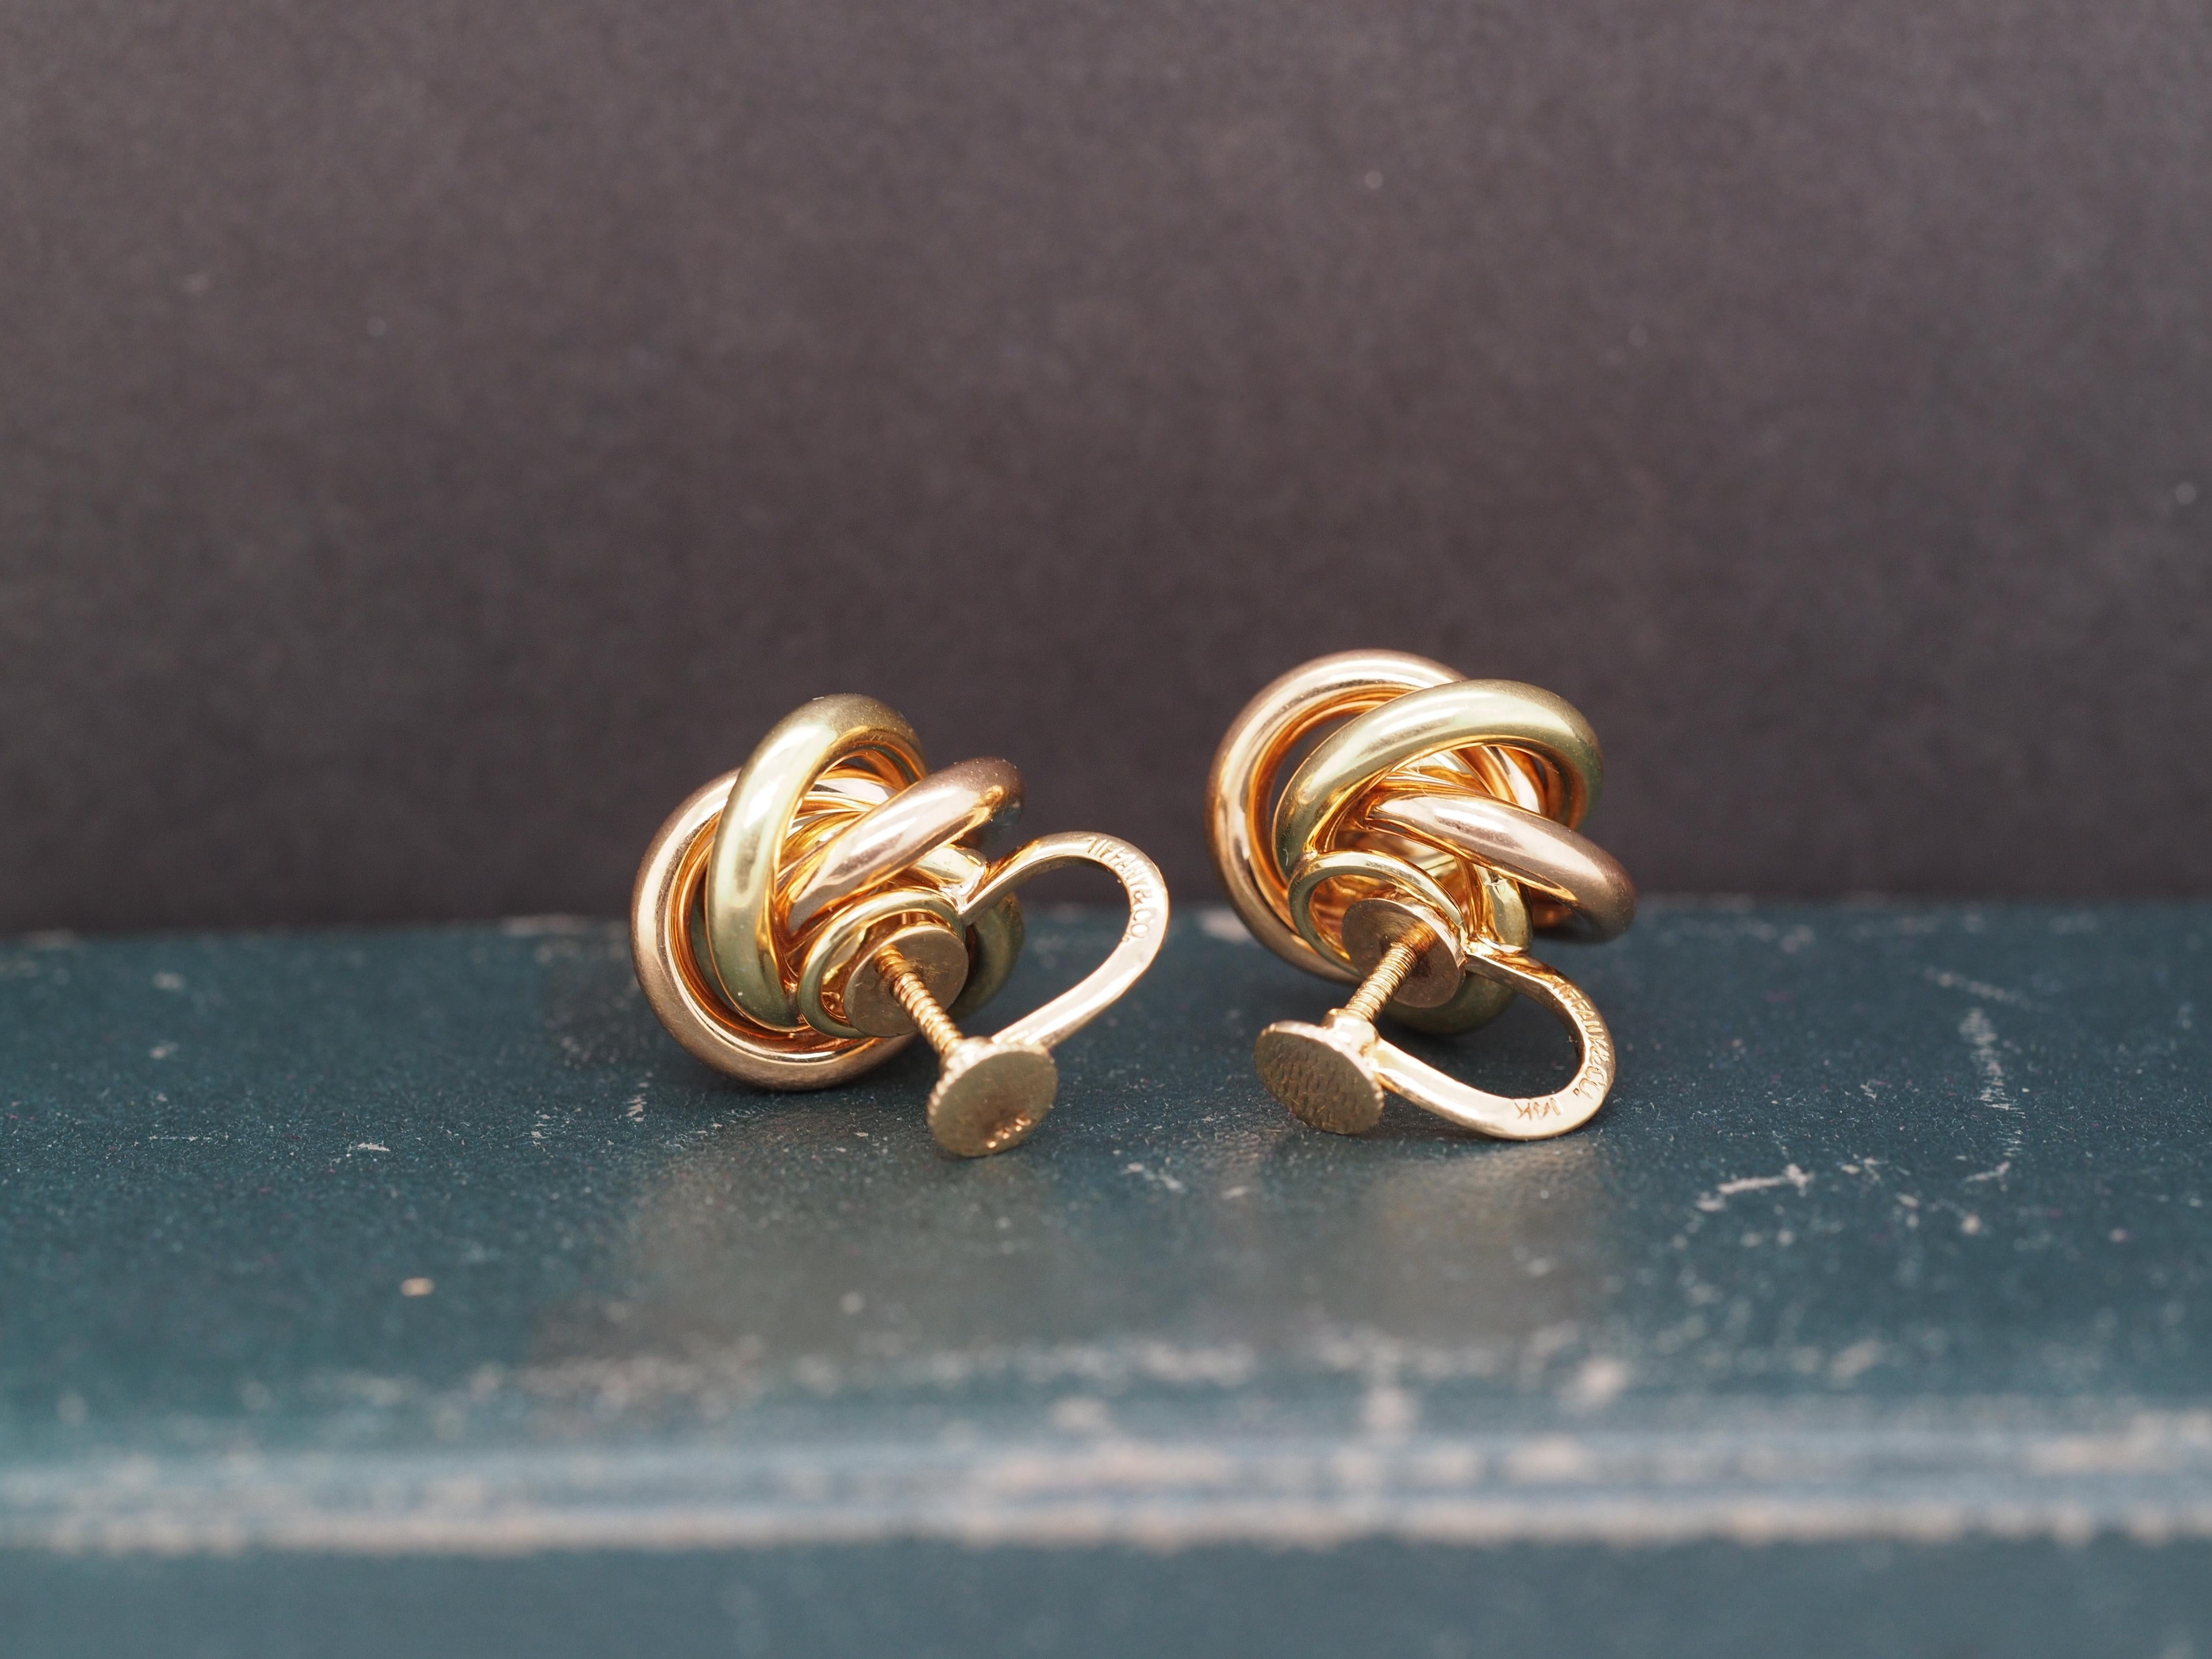 Circa 1950s Tiffany & Co 14K Yellow and Rose Gold Knot Earrings In Good Condition For Sale In Atlanta, GA